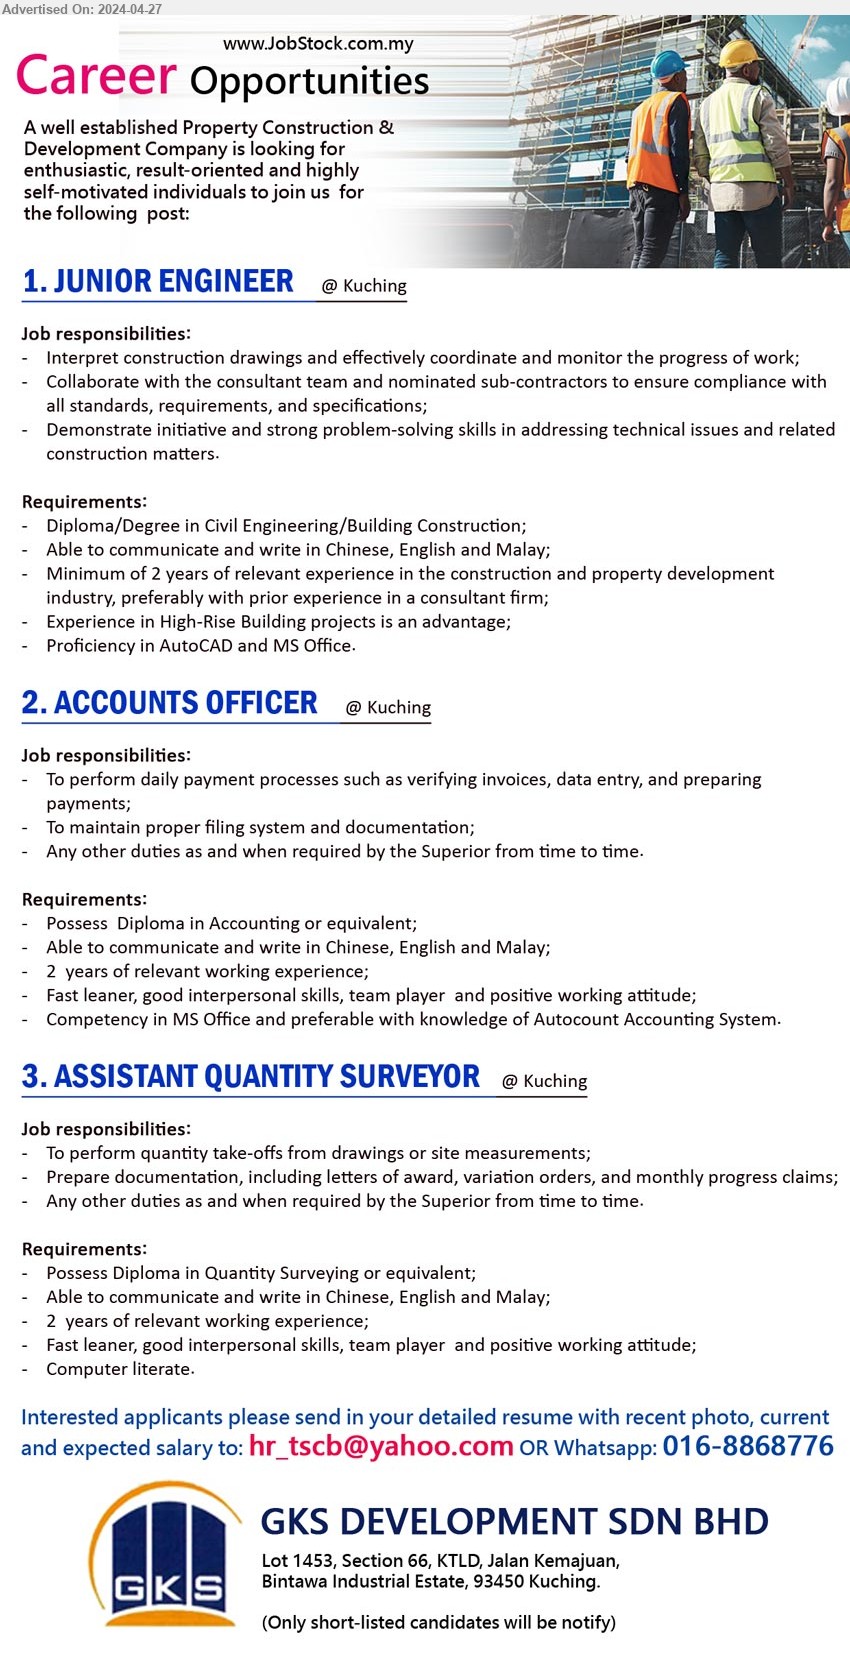 GKS DEVELOPMENT SDN BHD - 1. JUNIOR ENGINEER  (Kuching), Diploma/Degree in Civil Engineering/Building Construction; 2 yrs. exp.,...
2. ACCOUNTS OFFICER (Kuching), Diploma in Accounting, 2 yrs. exp., Competency in MS Office and preferable with knowledge of Autocount Accounting System.,...
3. ASSISTANT QUANTITY SURVEYOR  (Kuching), Diploma in Quantity Surveying, 2 yrs. exp.,...
Whatsapp: 016-8868776 / Email resume to ...
